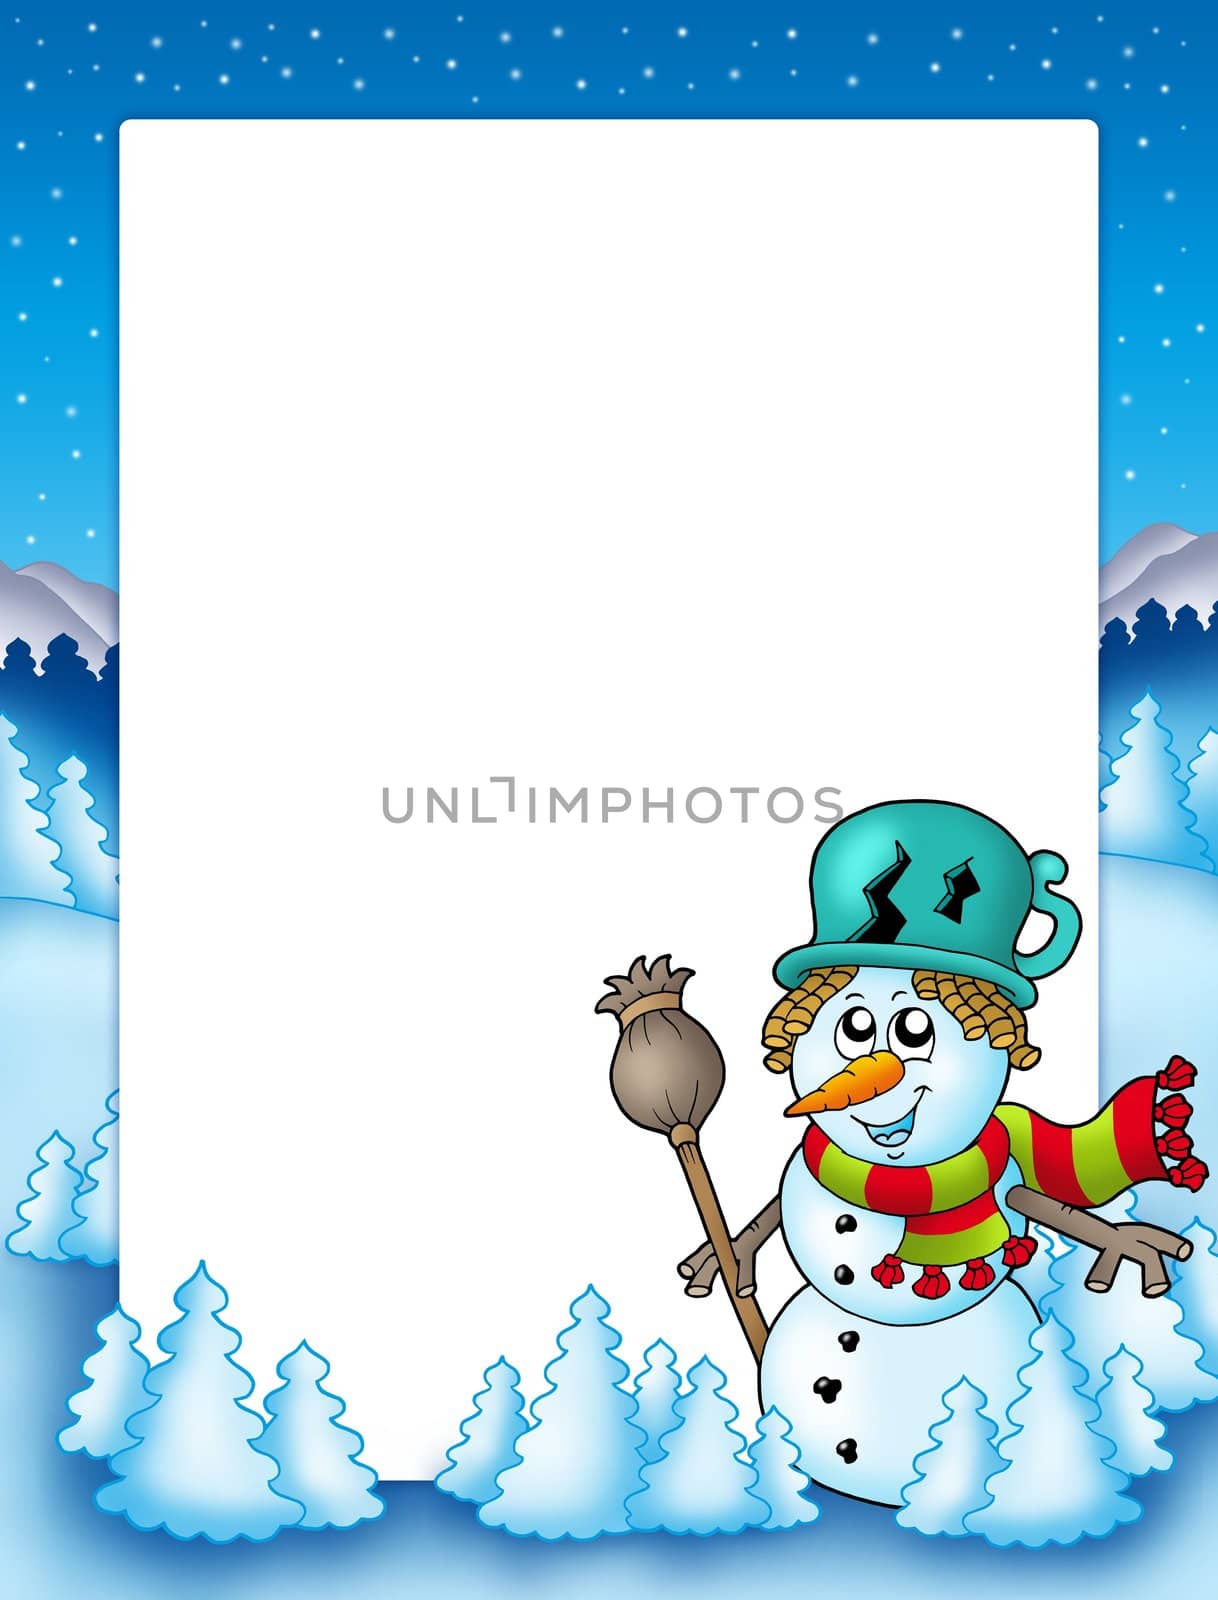 Frame with snowman and trees by clairev